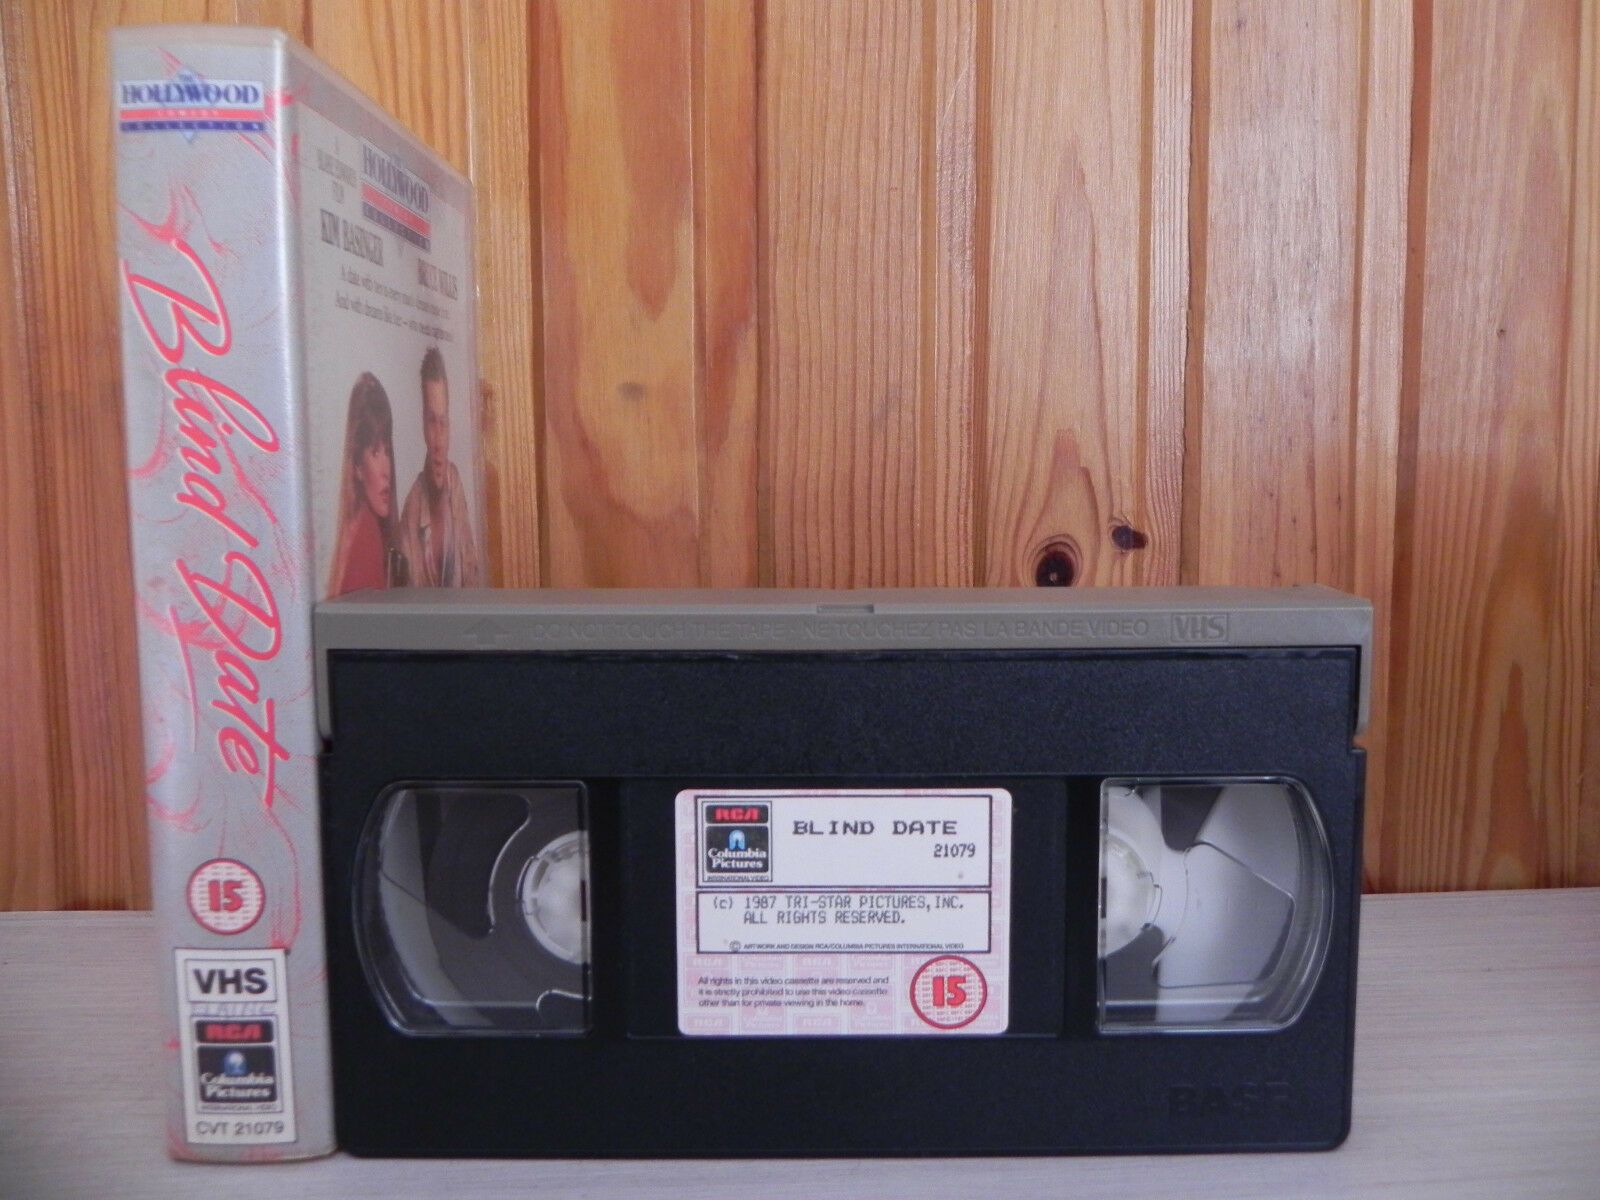 Blind Date - Columbia Pictures - Comedy - Kim Basinger - Bruce Willis - Pal VHS-